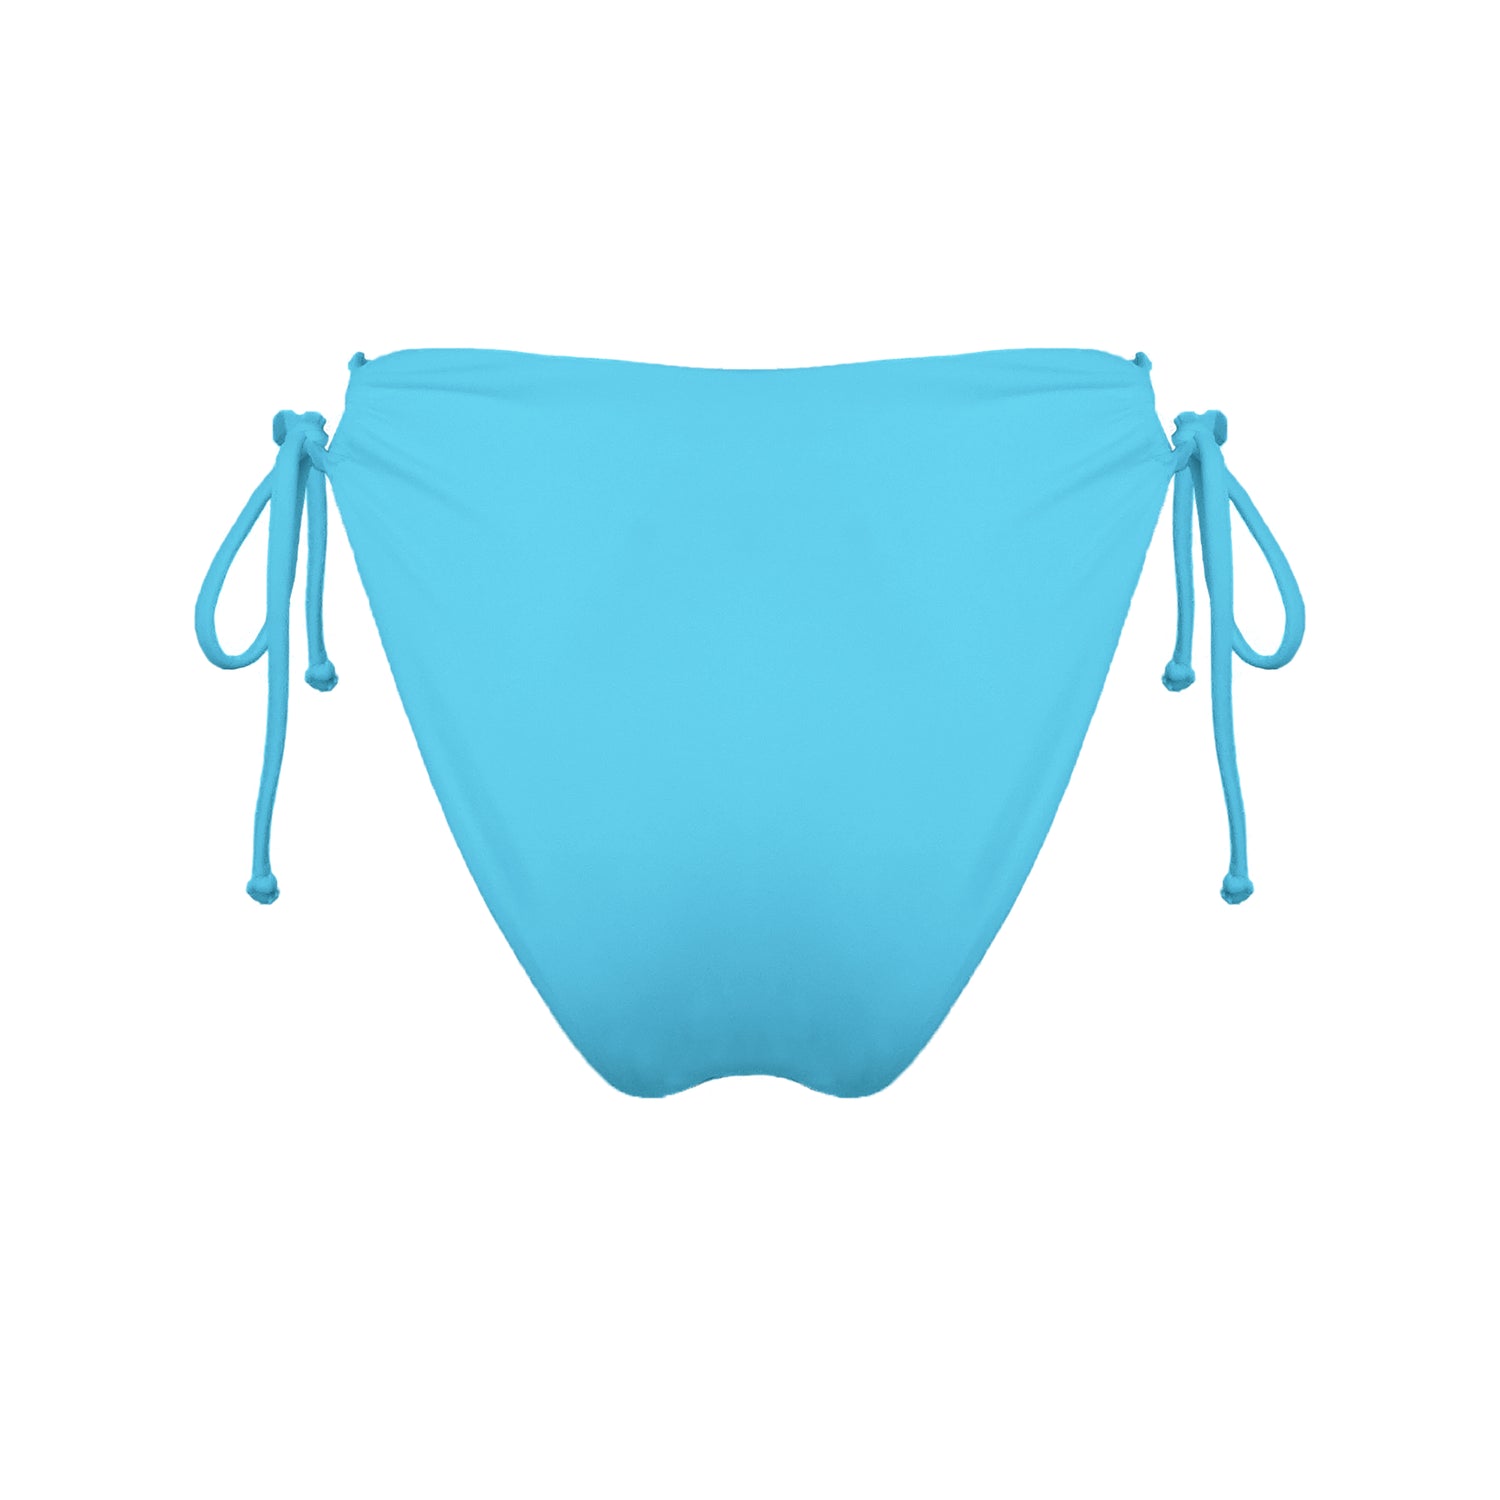 Back view of acqua blue strappy mid-rise bikini bottoms with high cut legs and cheeky coverage.